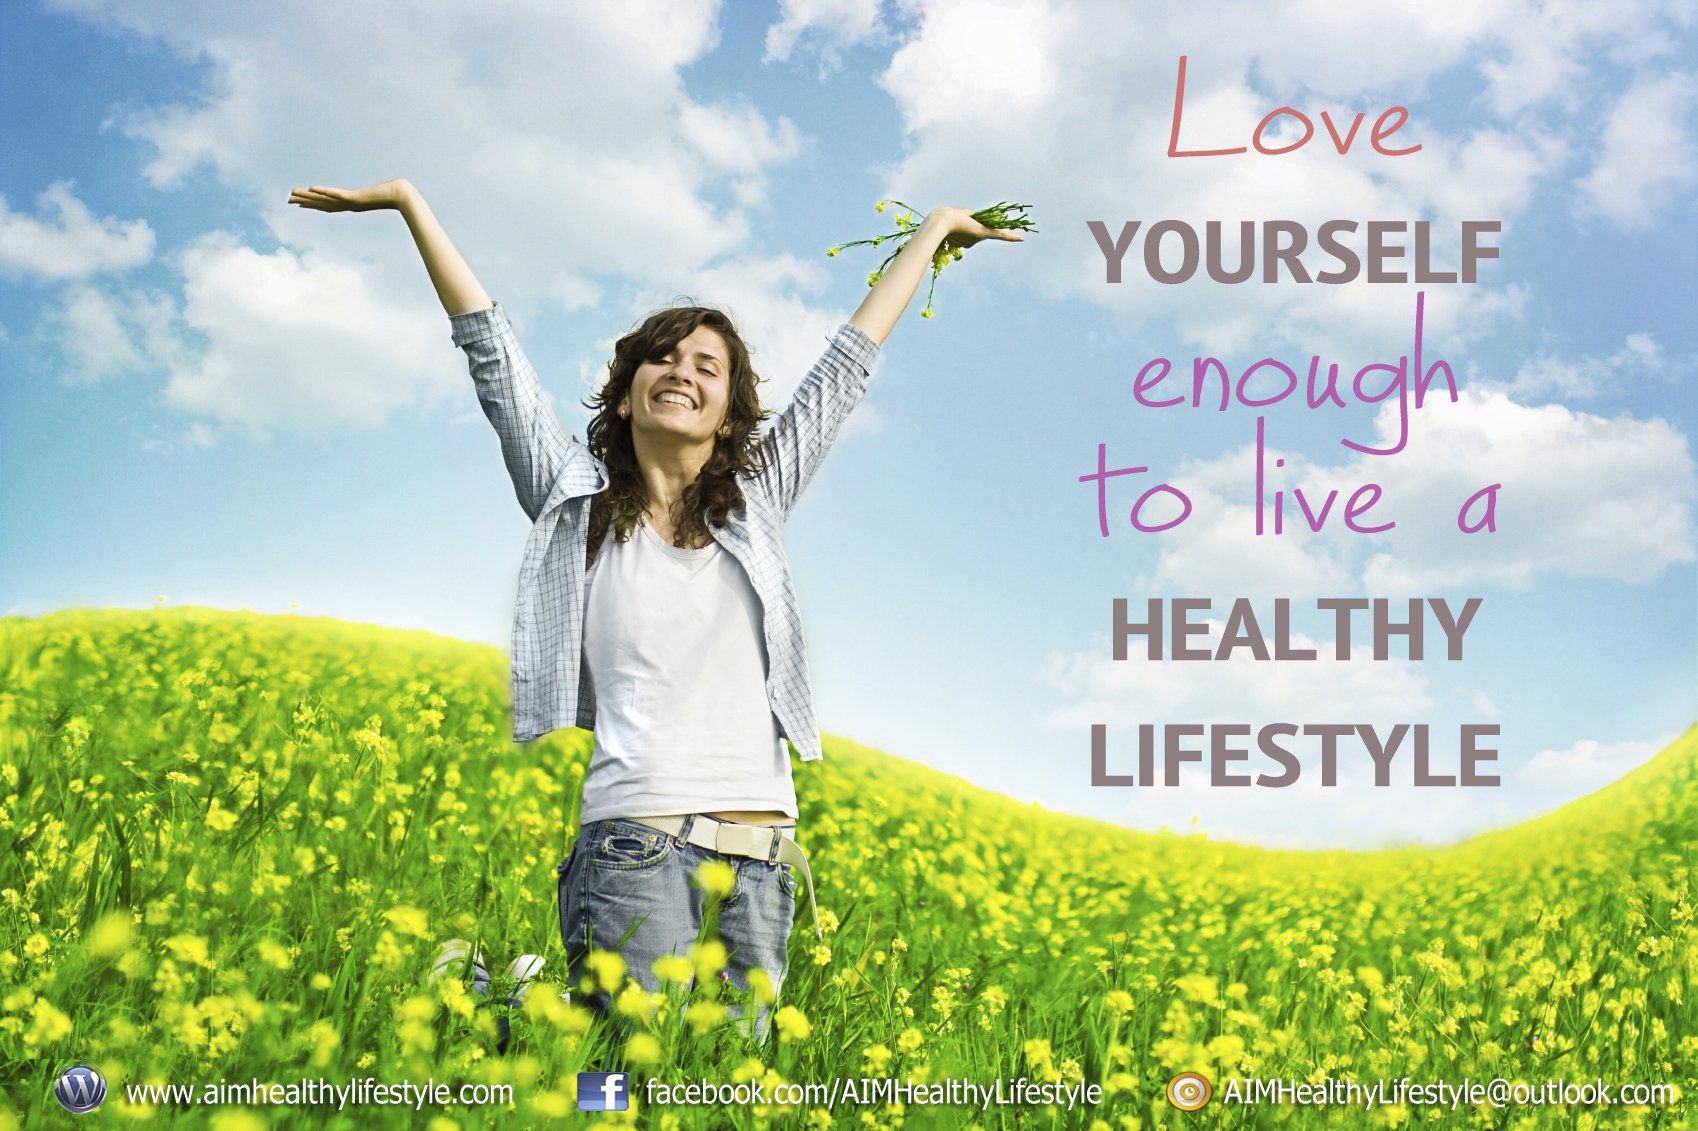 Love Yourself Enough To Live a Healthy Lifestyle